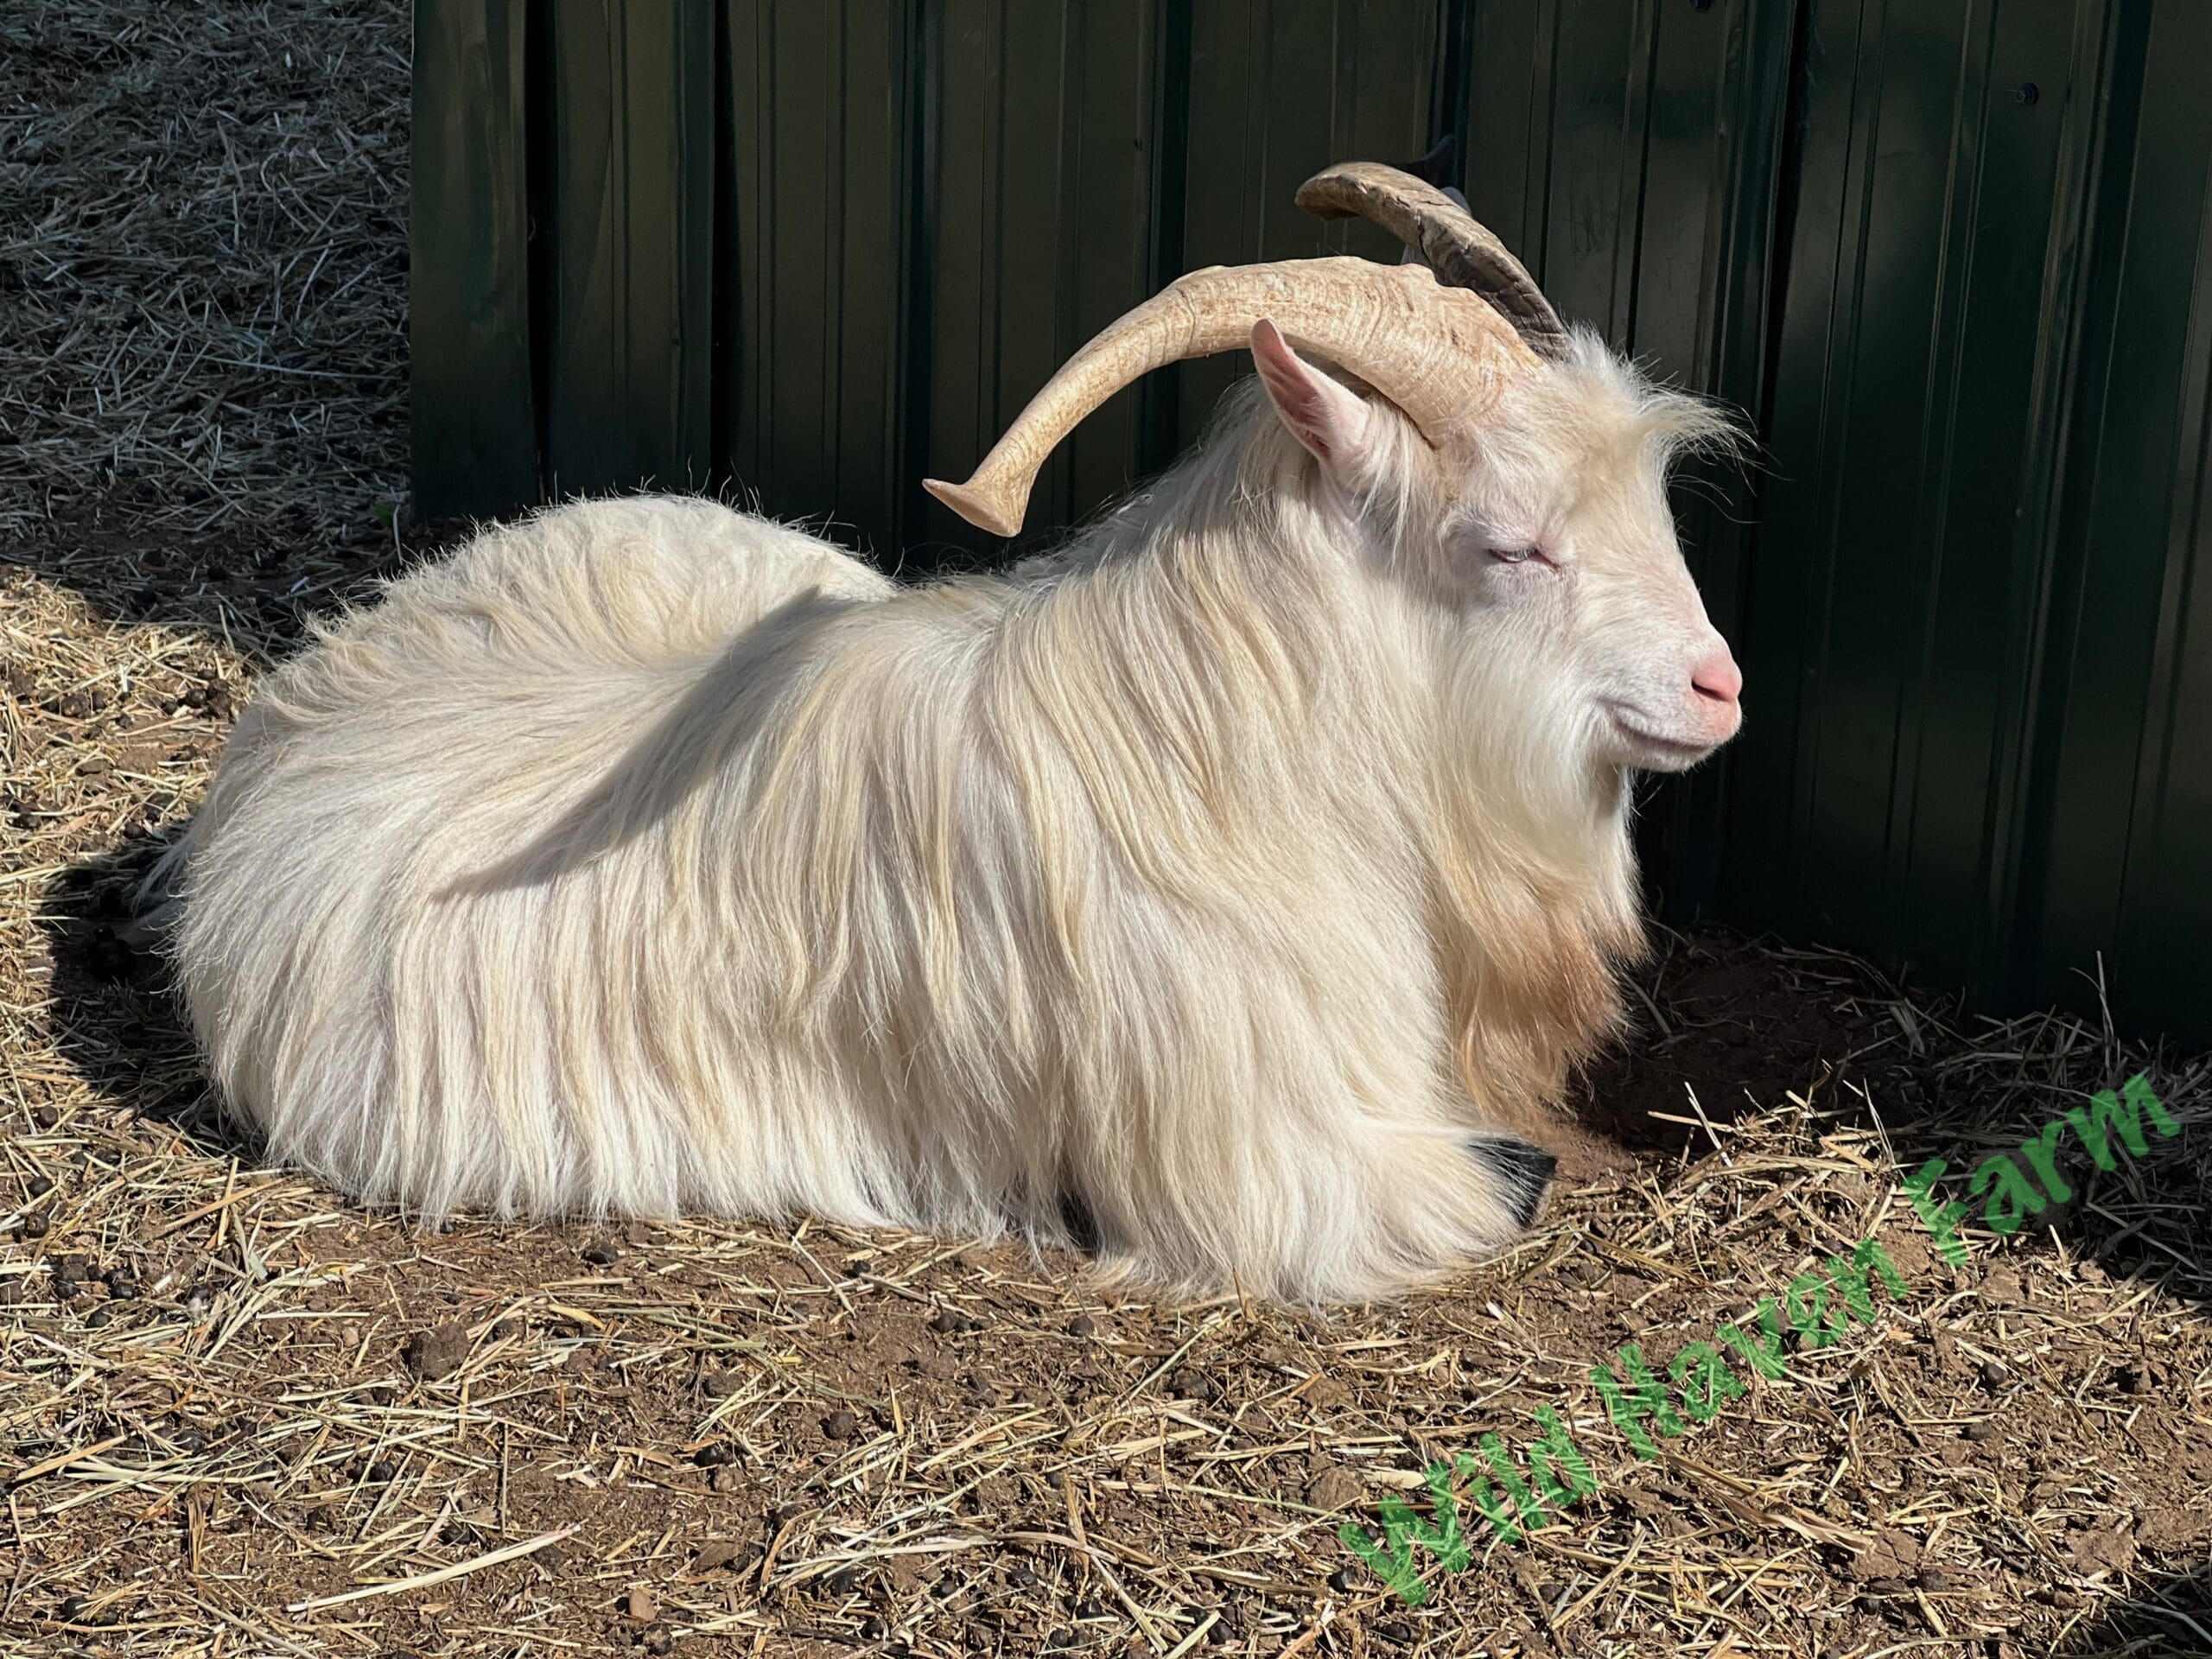 Goat (Blizzard Sky) with large horns laying in the sun appearing to smile.